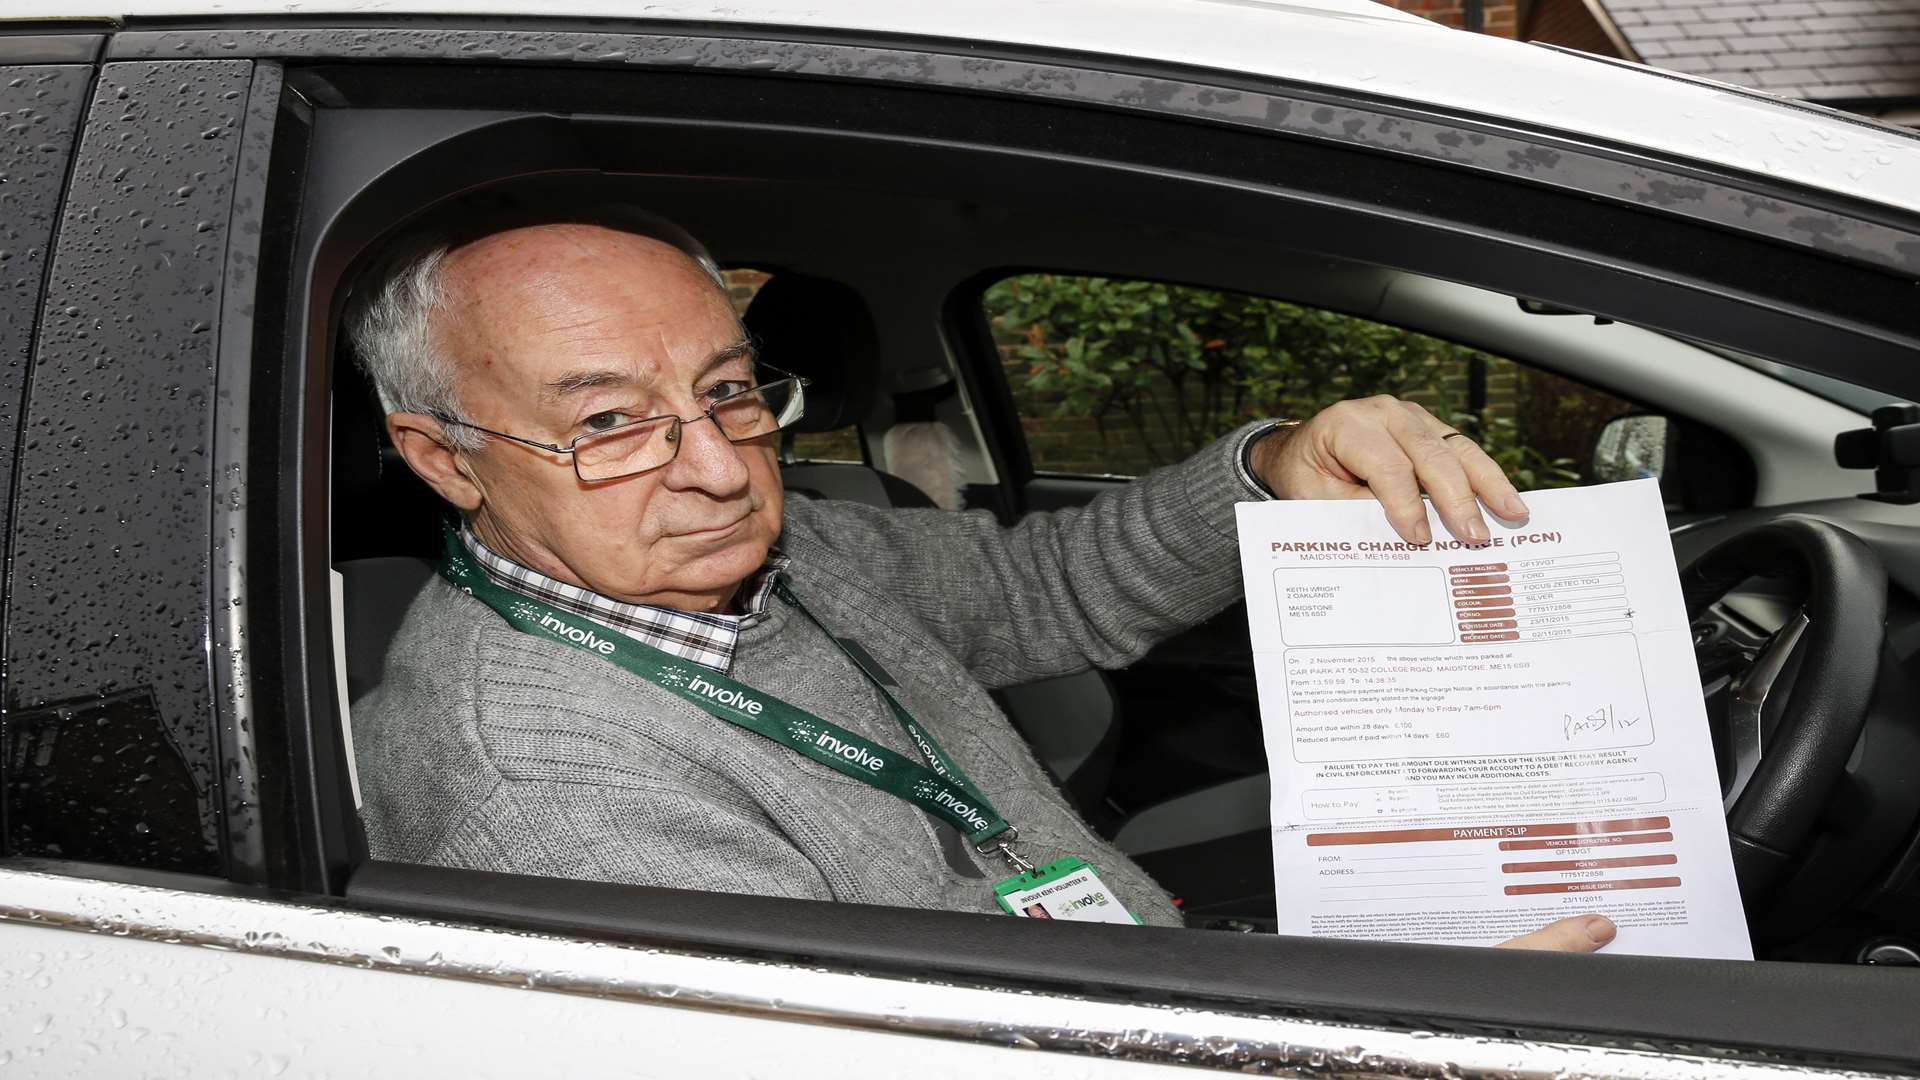 Volunteer driver Keith Wright, who received a parking ticket